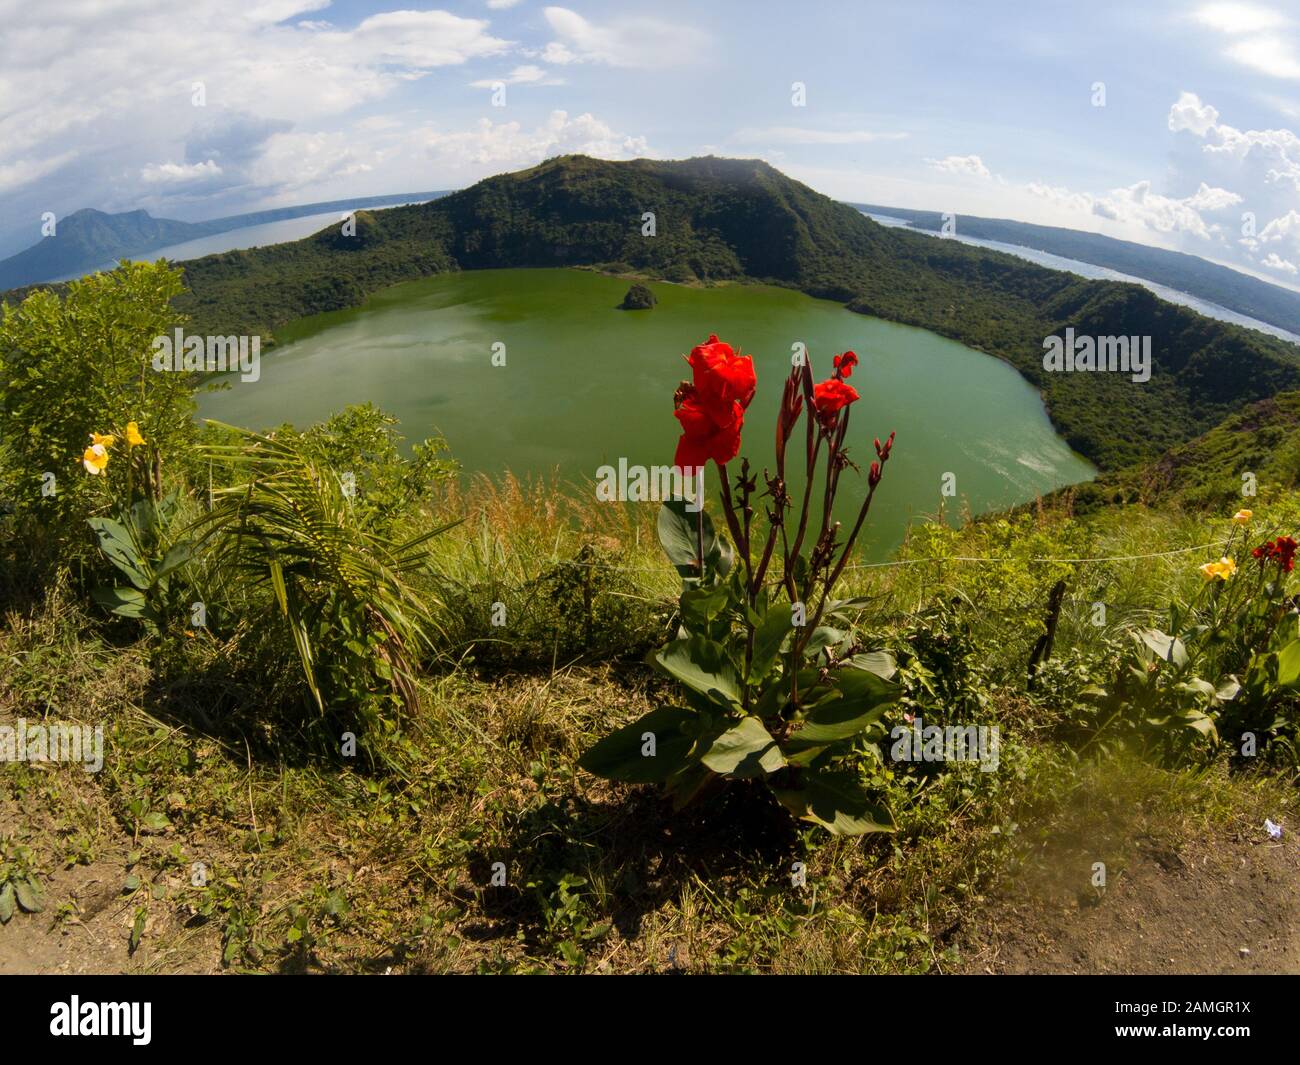 The crater of Taal Volcano shot in 2018 Stock Photo